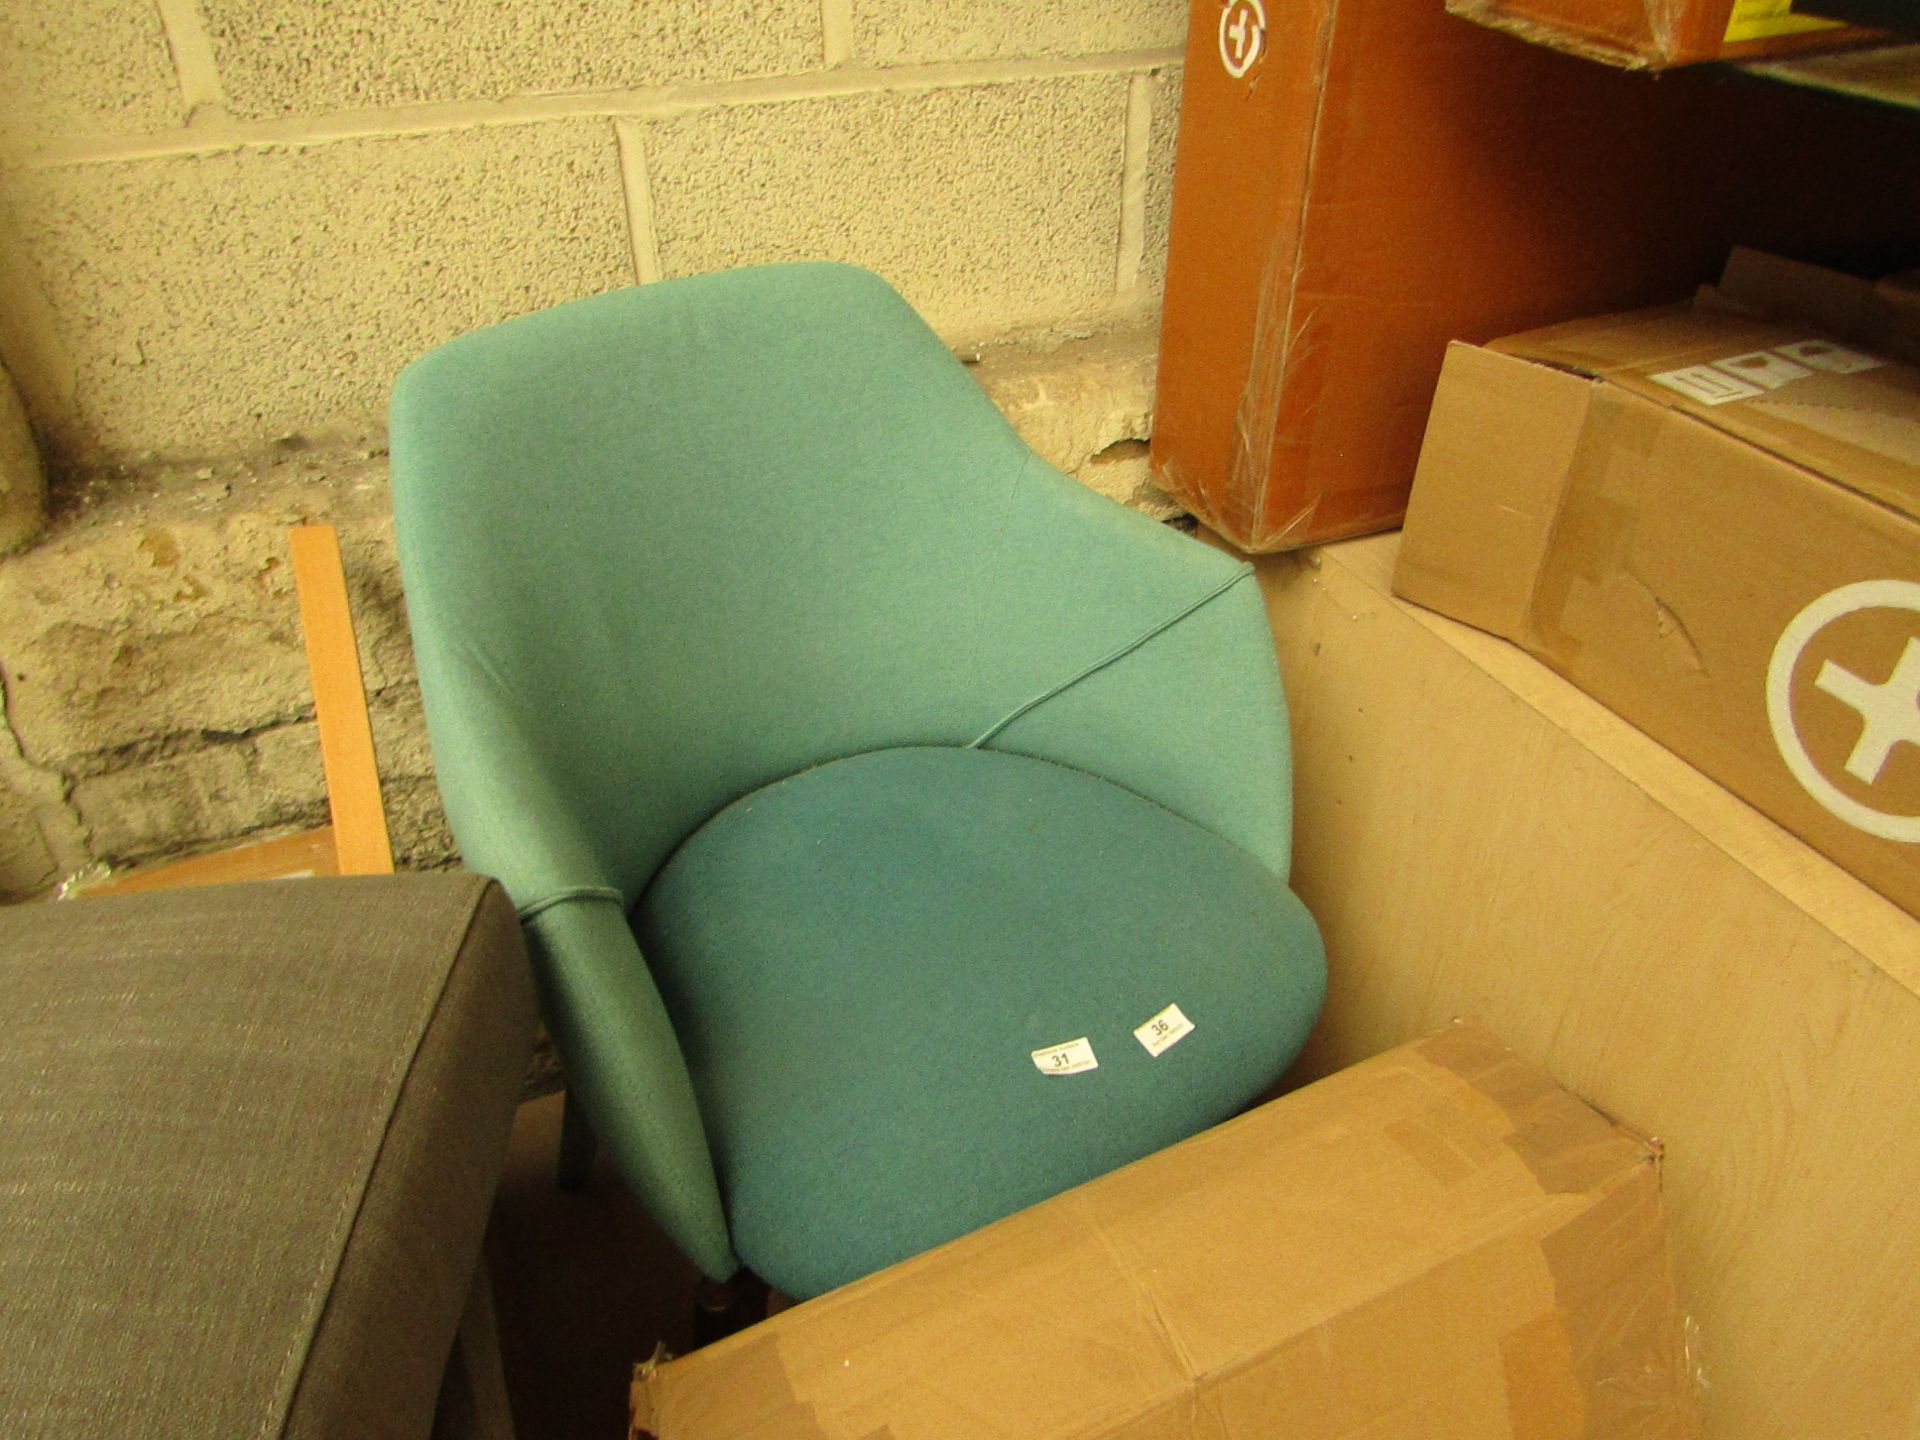 | 1X | MADE.COM LULE OFFICE CHAIR | MINERAL BLUE & EMERALD GREEN | UNCHECKED & BOXED | RRP £179 |